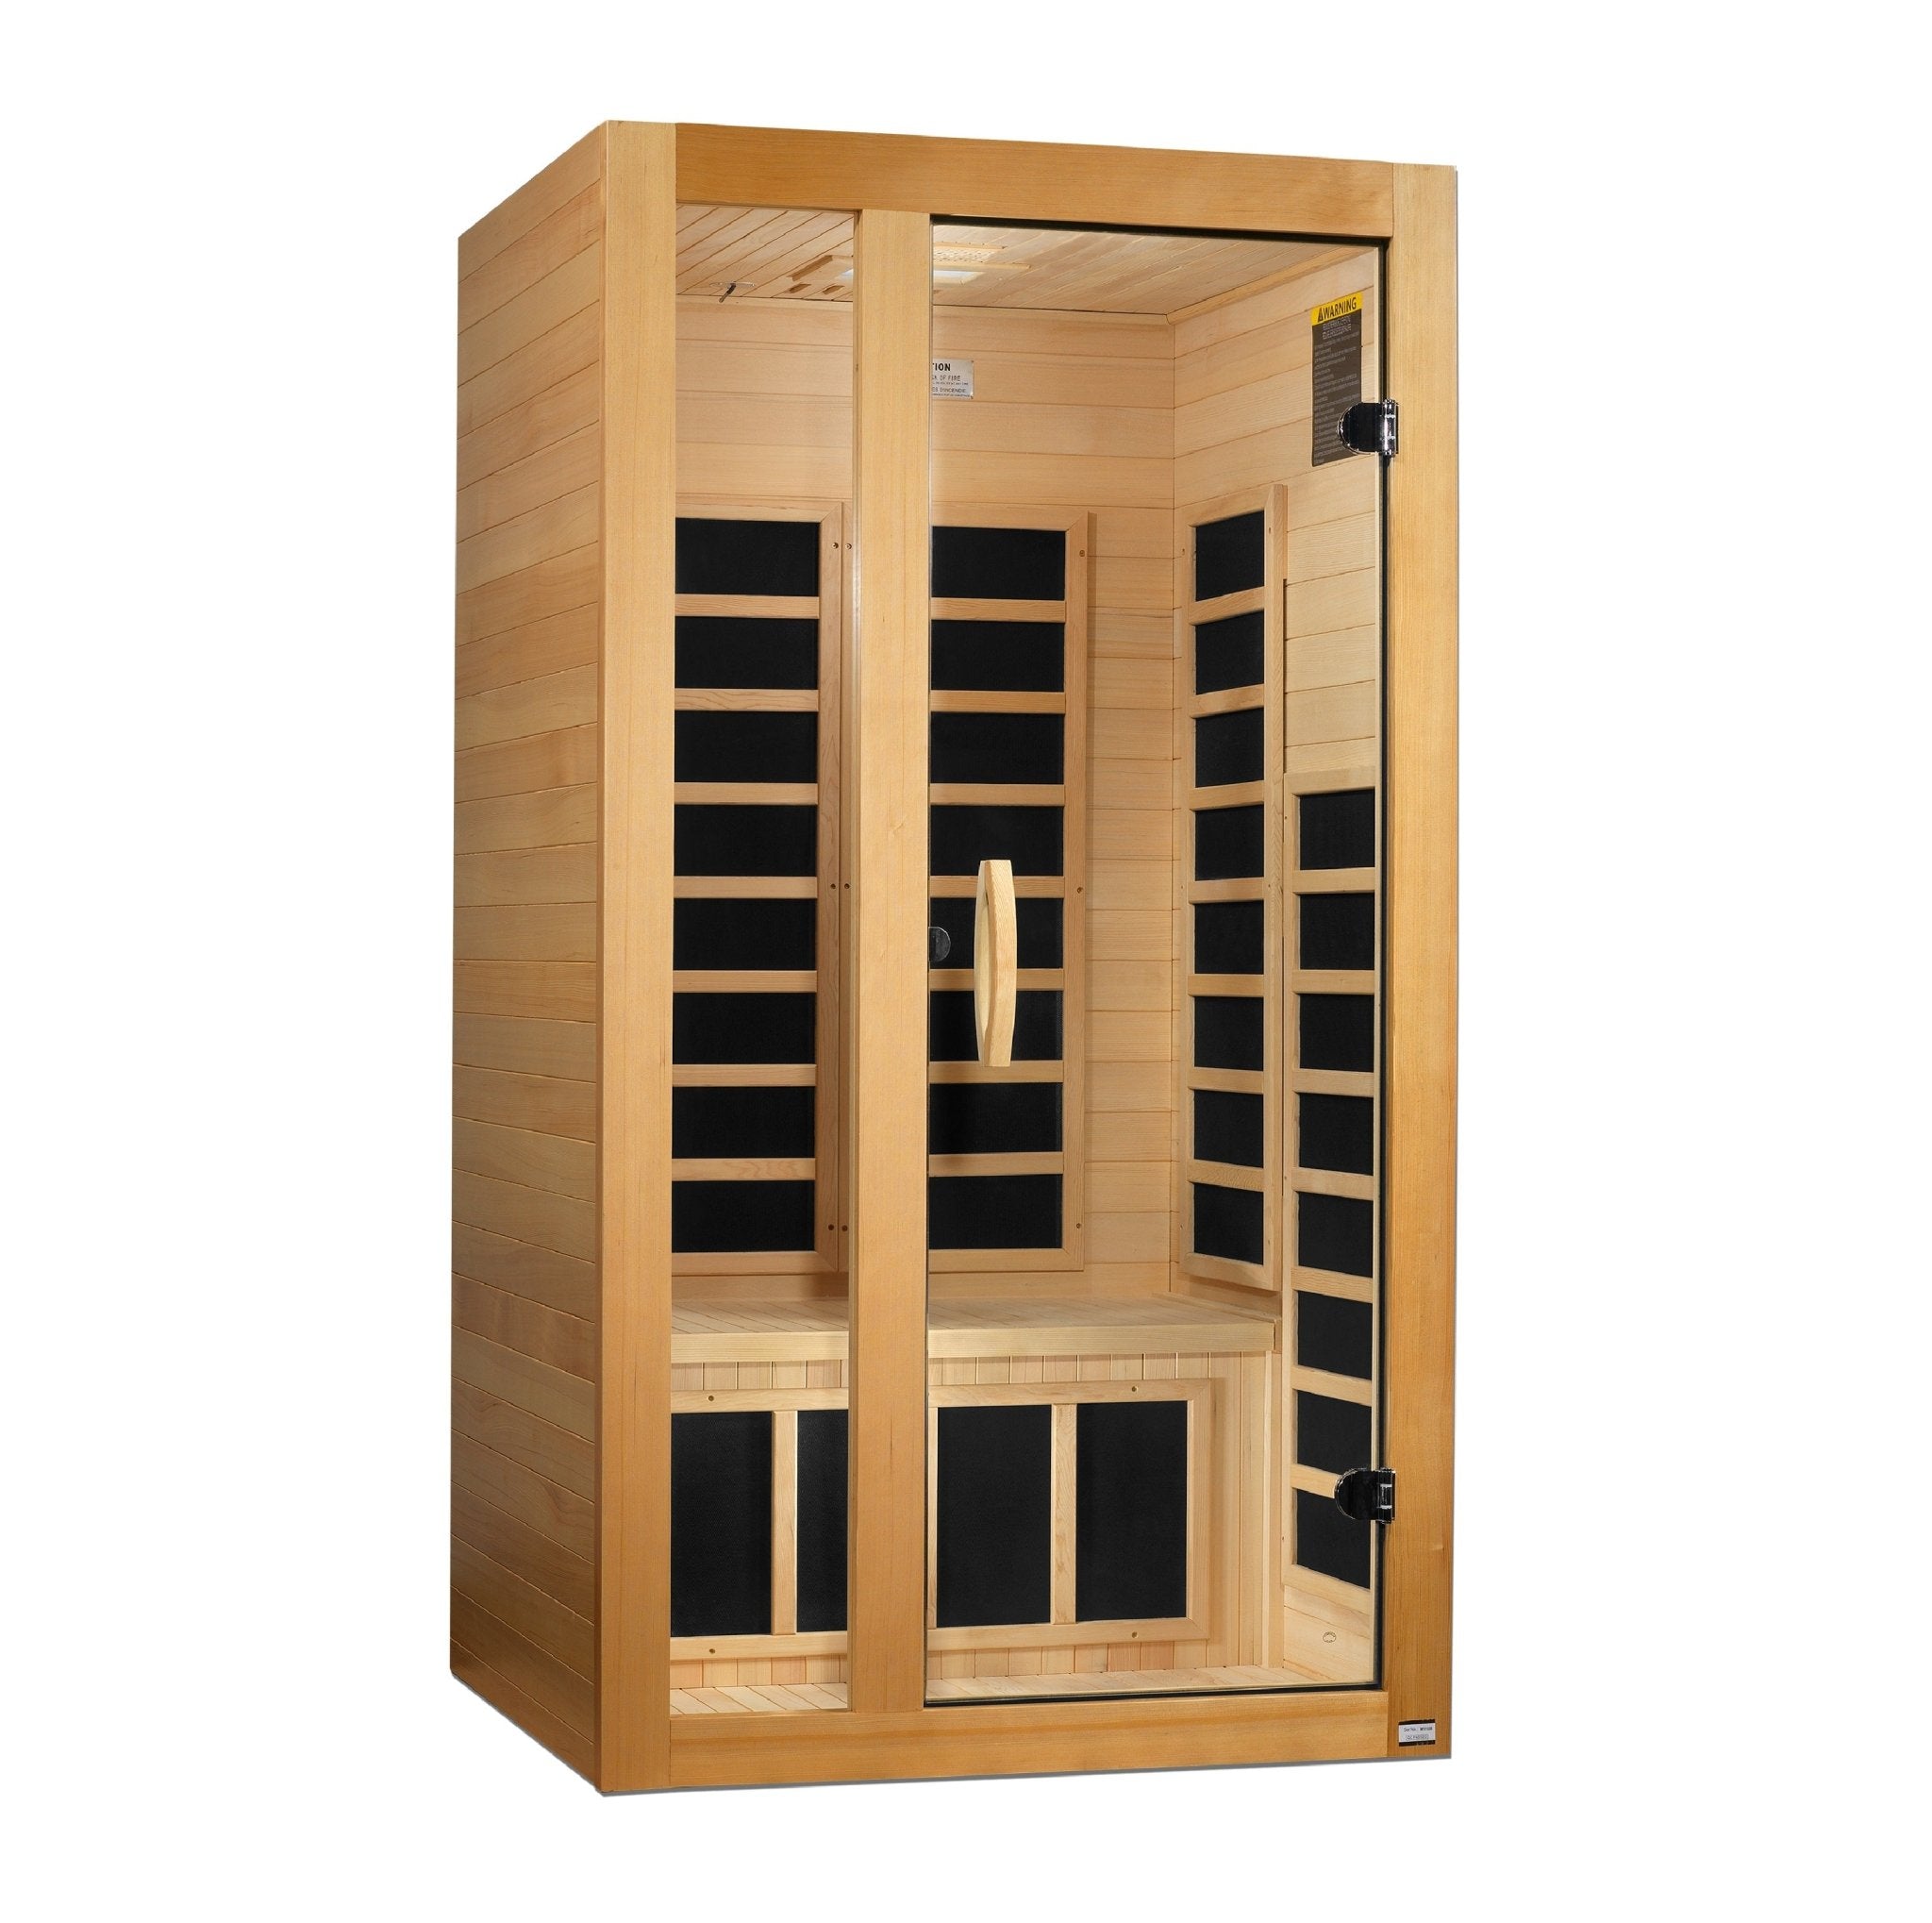 ***New 2021 Model*** Gracia - 1-2 Person Low EMF FAR Infrared Sauna - First Class Caves